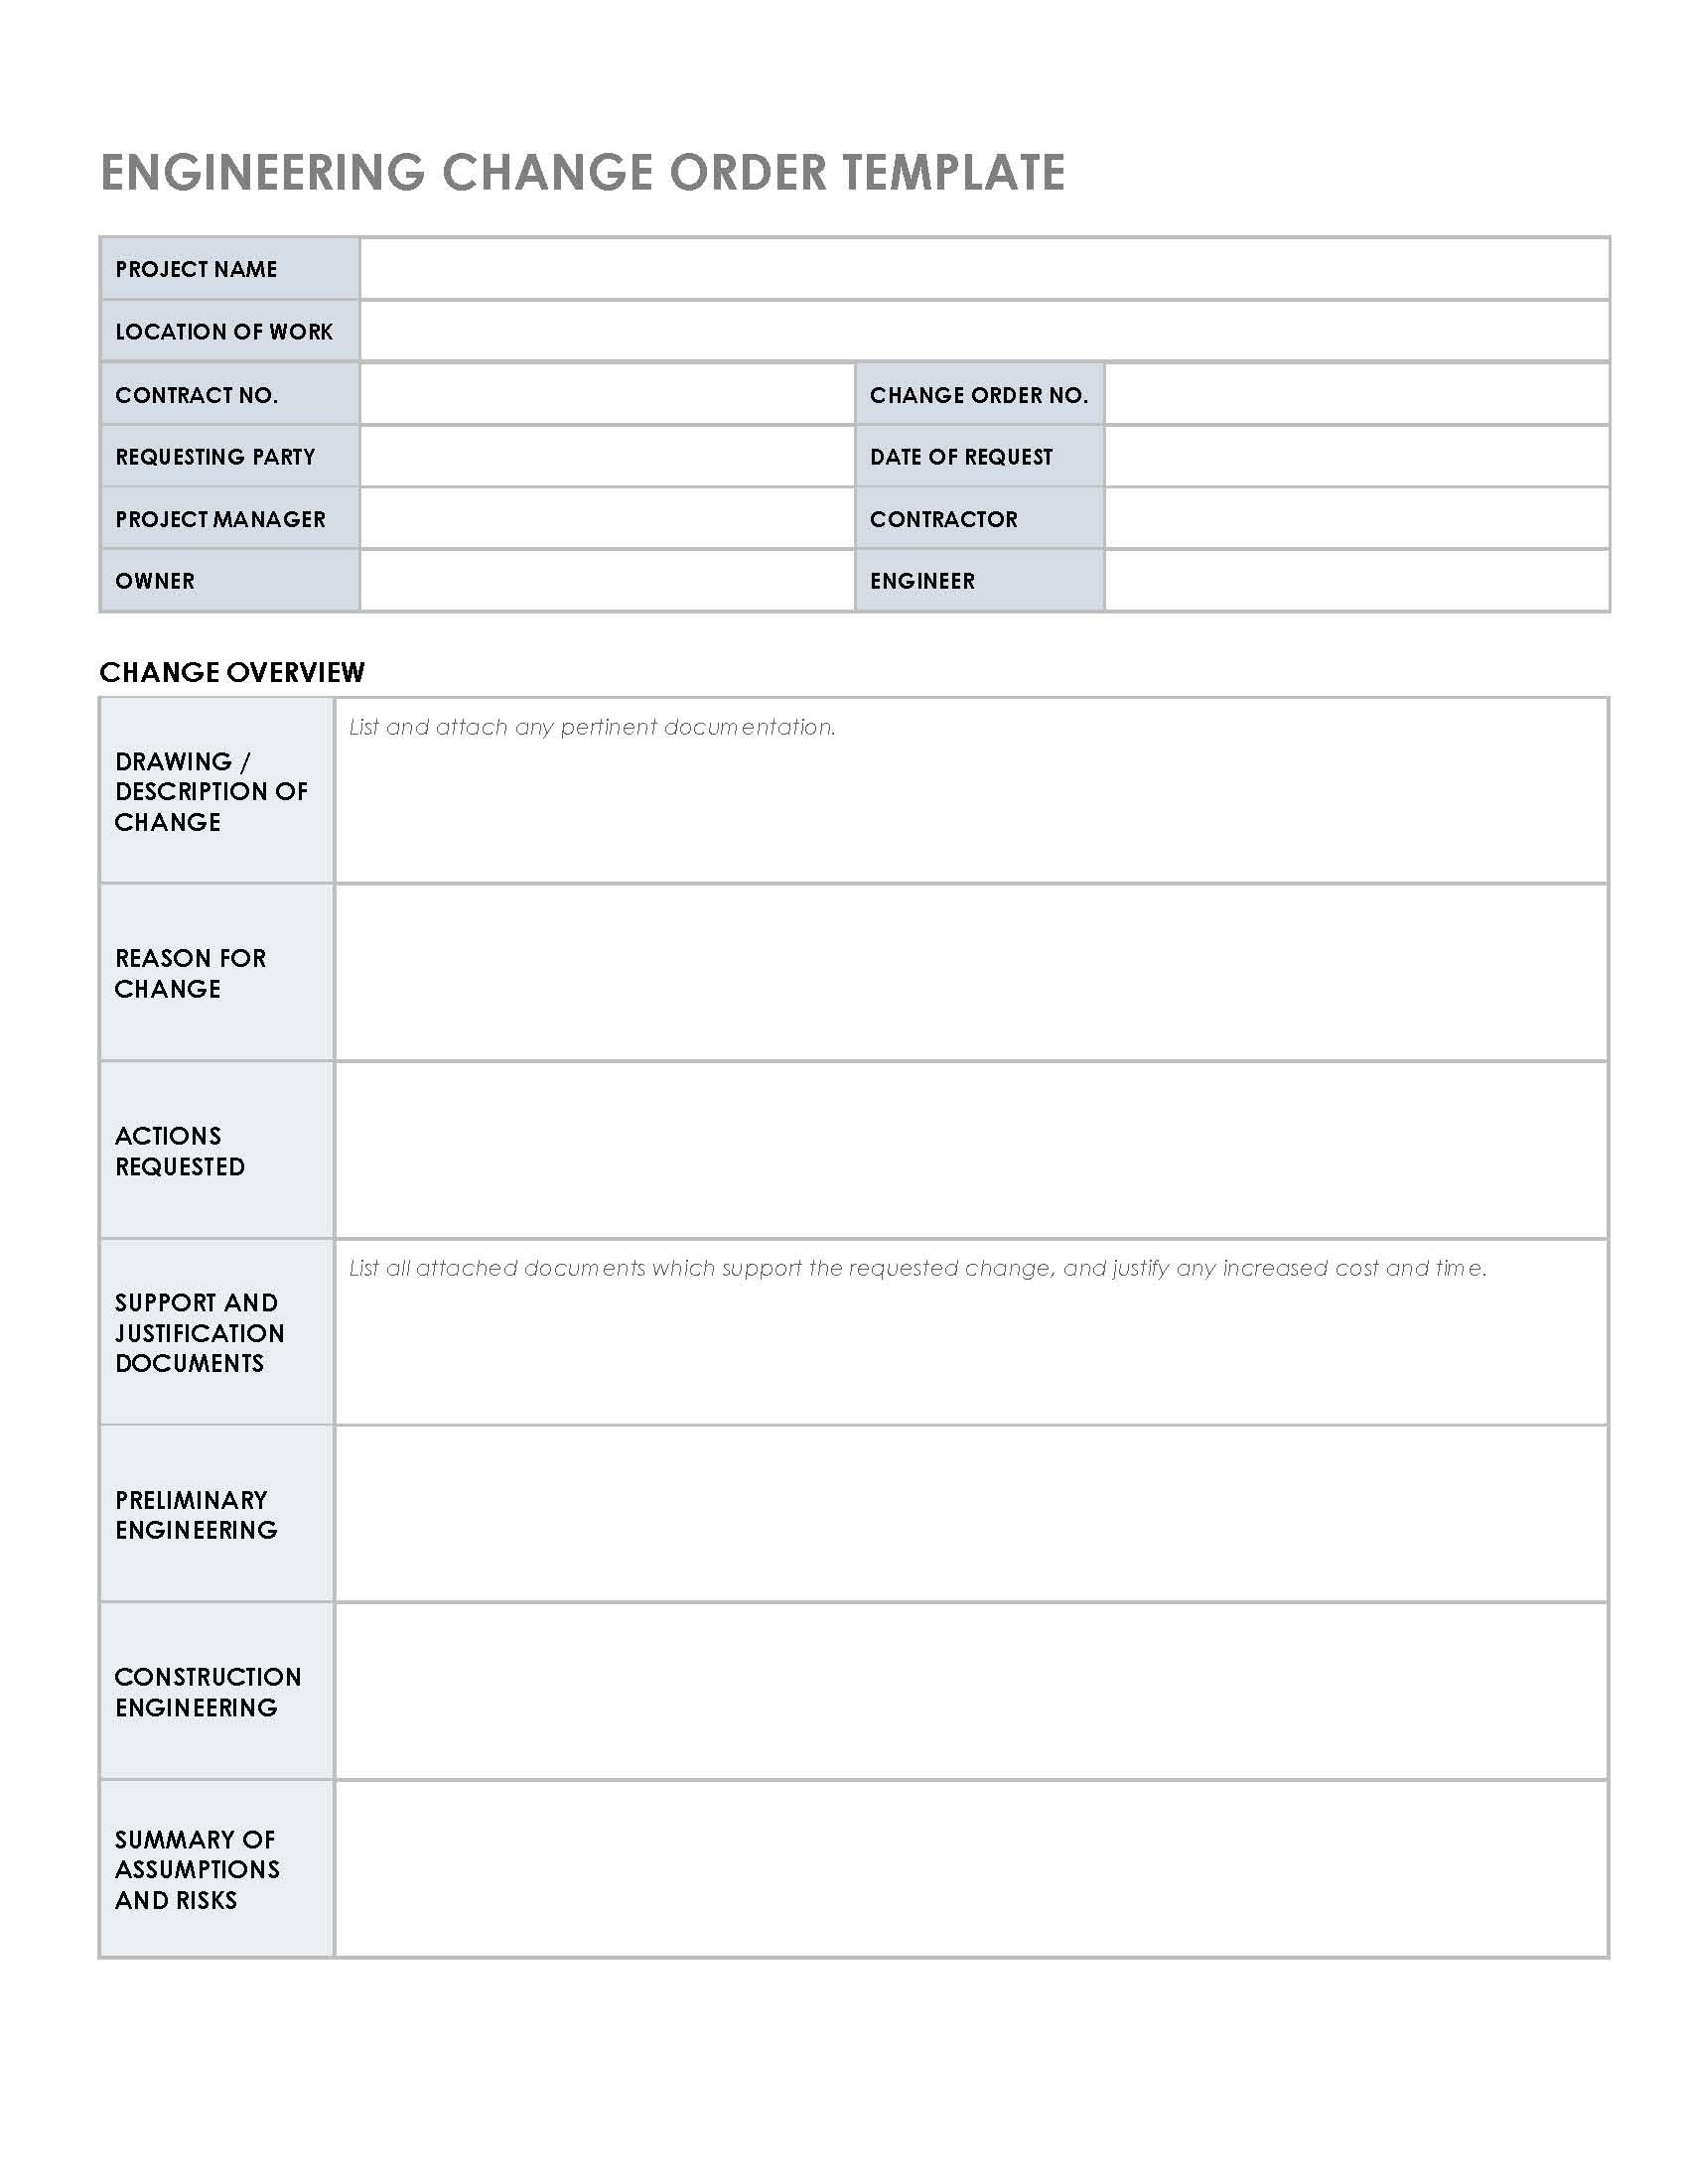 Engineering Change Order Template Free Download Project Management Templates Templates Free Download Template Free